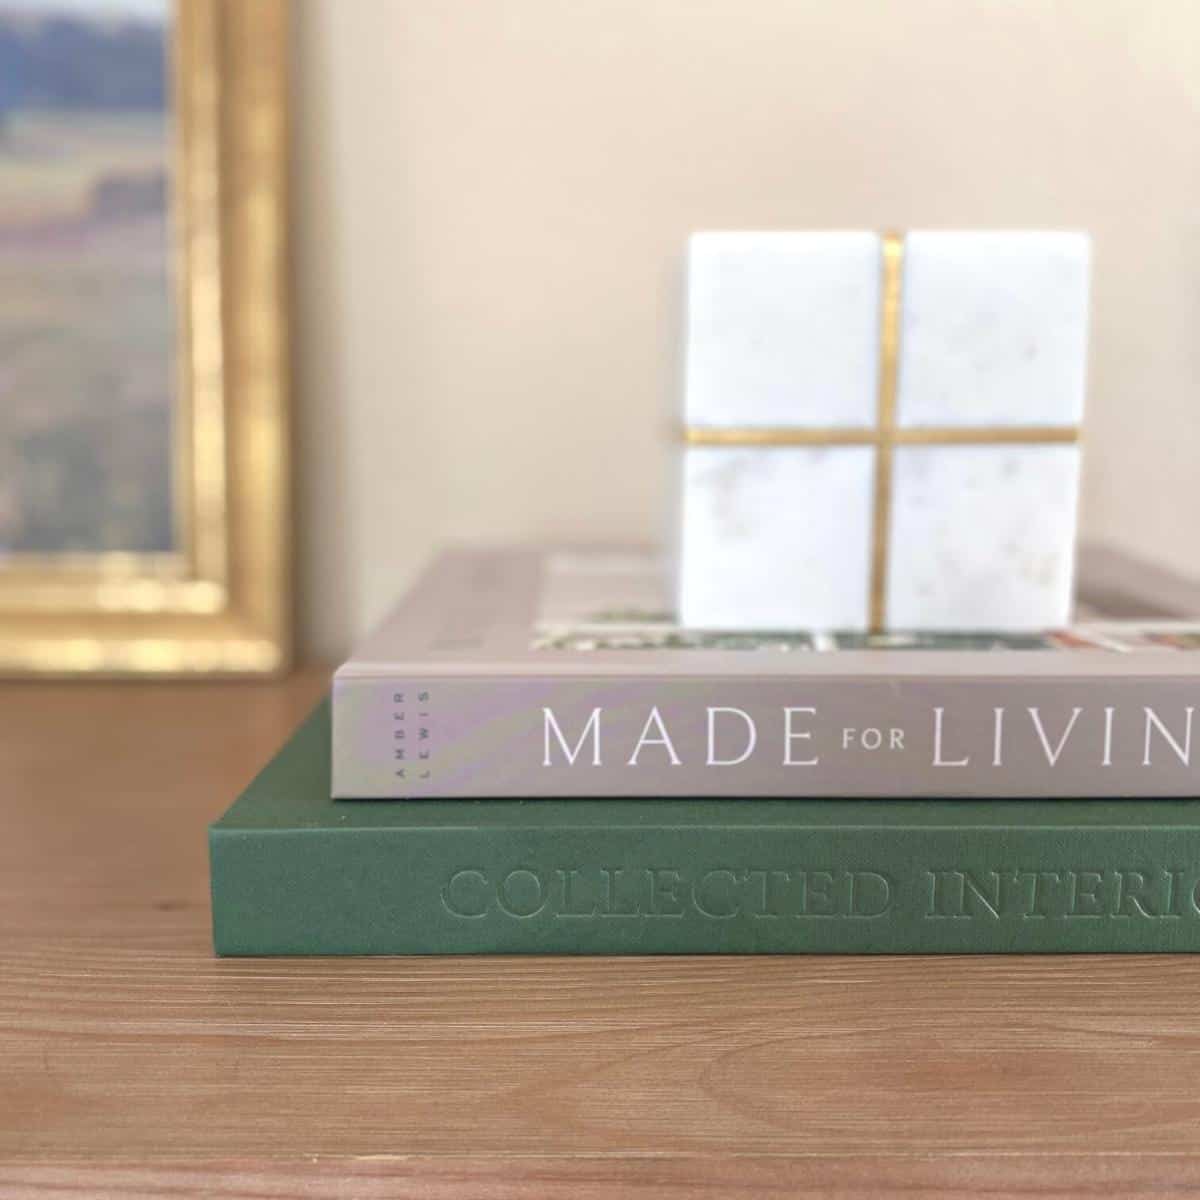 A marble and brass cube object sits atop two books; one gray and one dark green, next to gold framed artwork